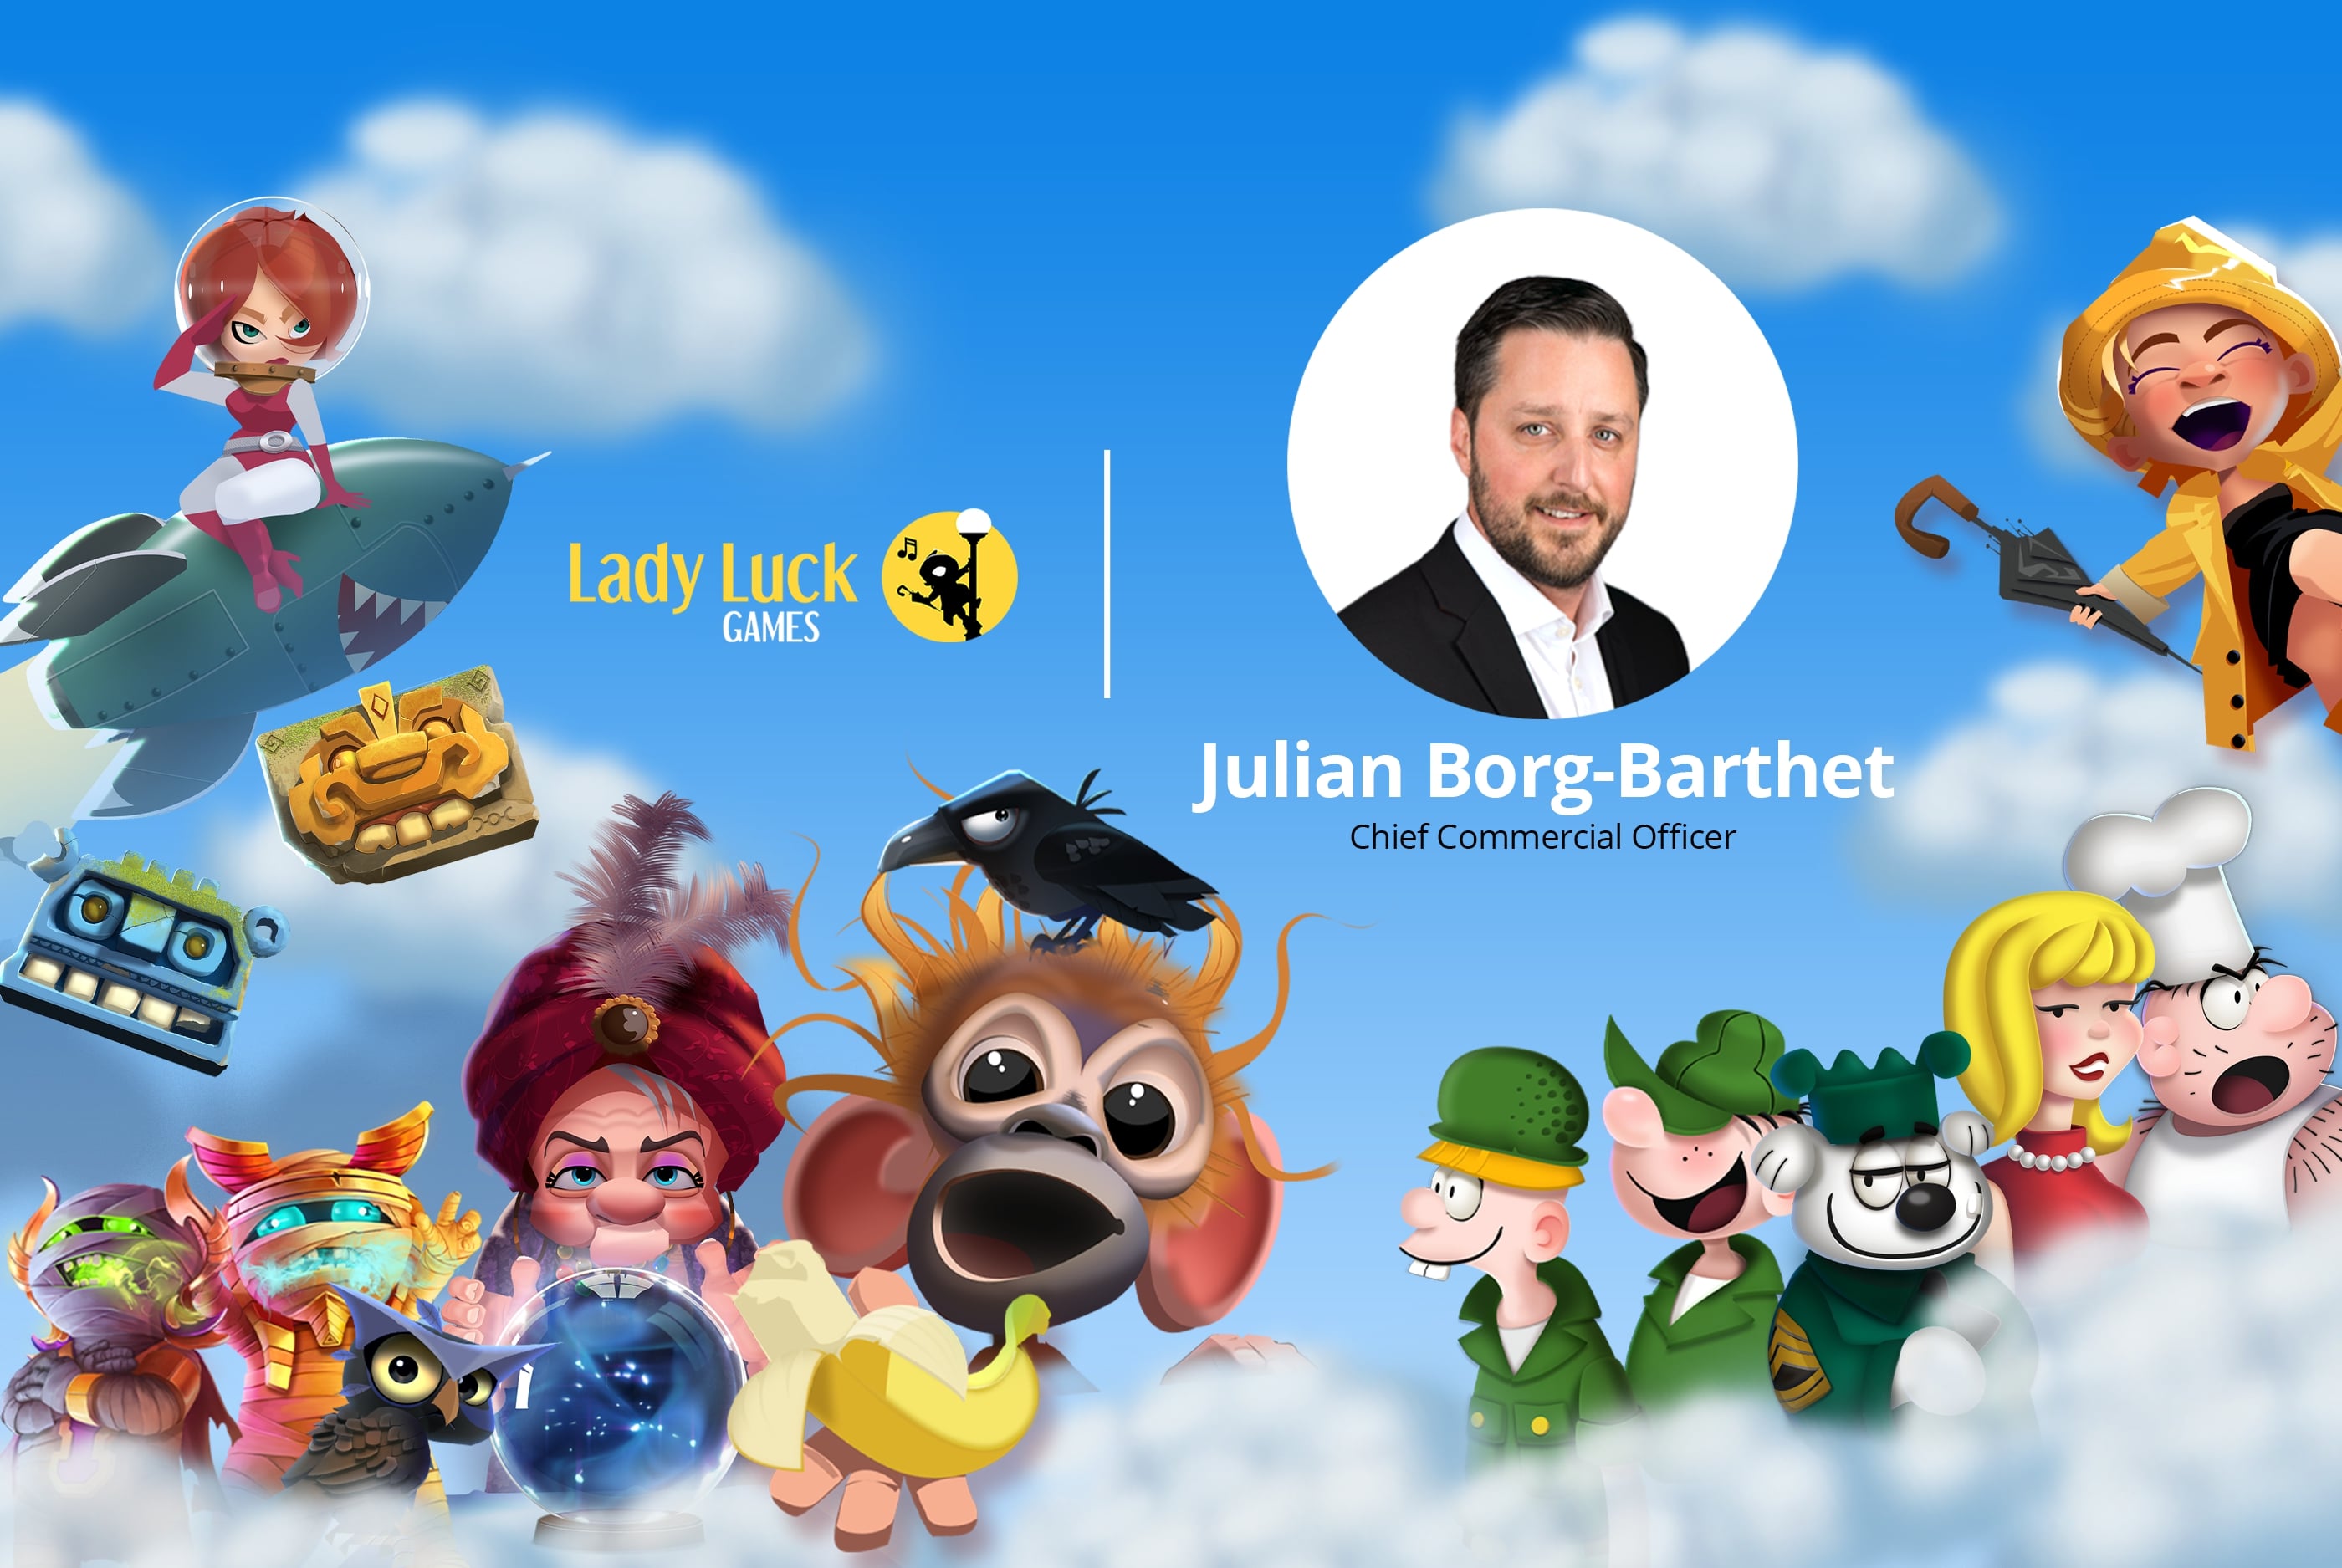 “We’re always looking for new ways to push the boundaries of what’s possible in iGaming.”